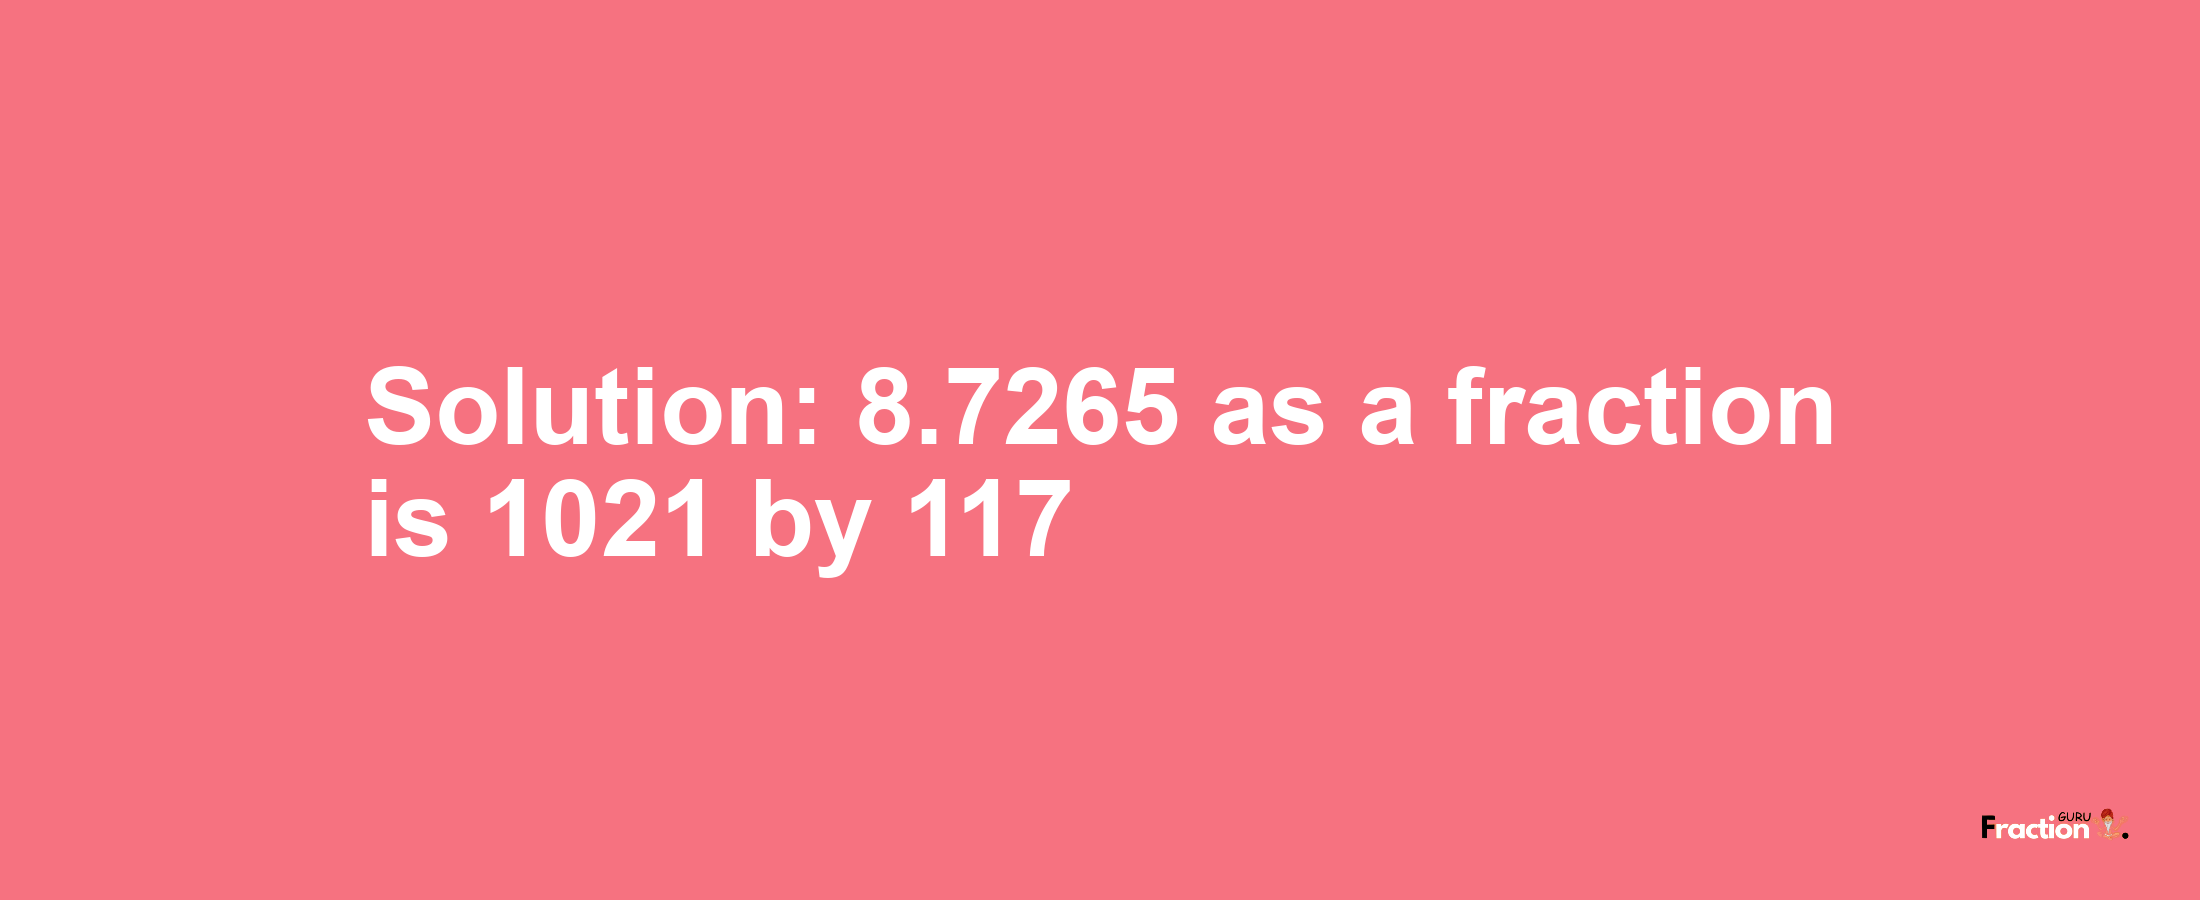 Solution:8.7265 as a fraction is 1021/117